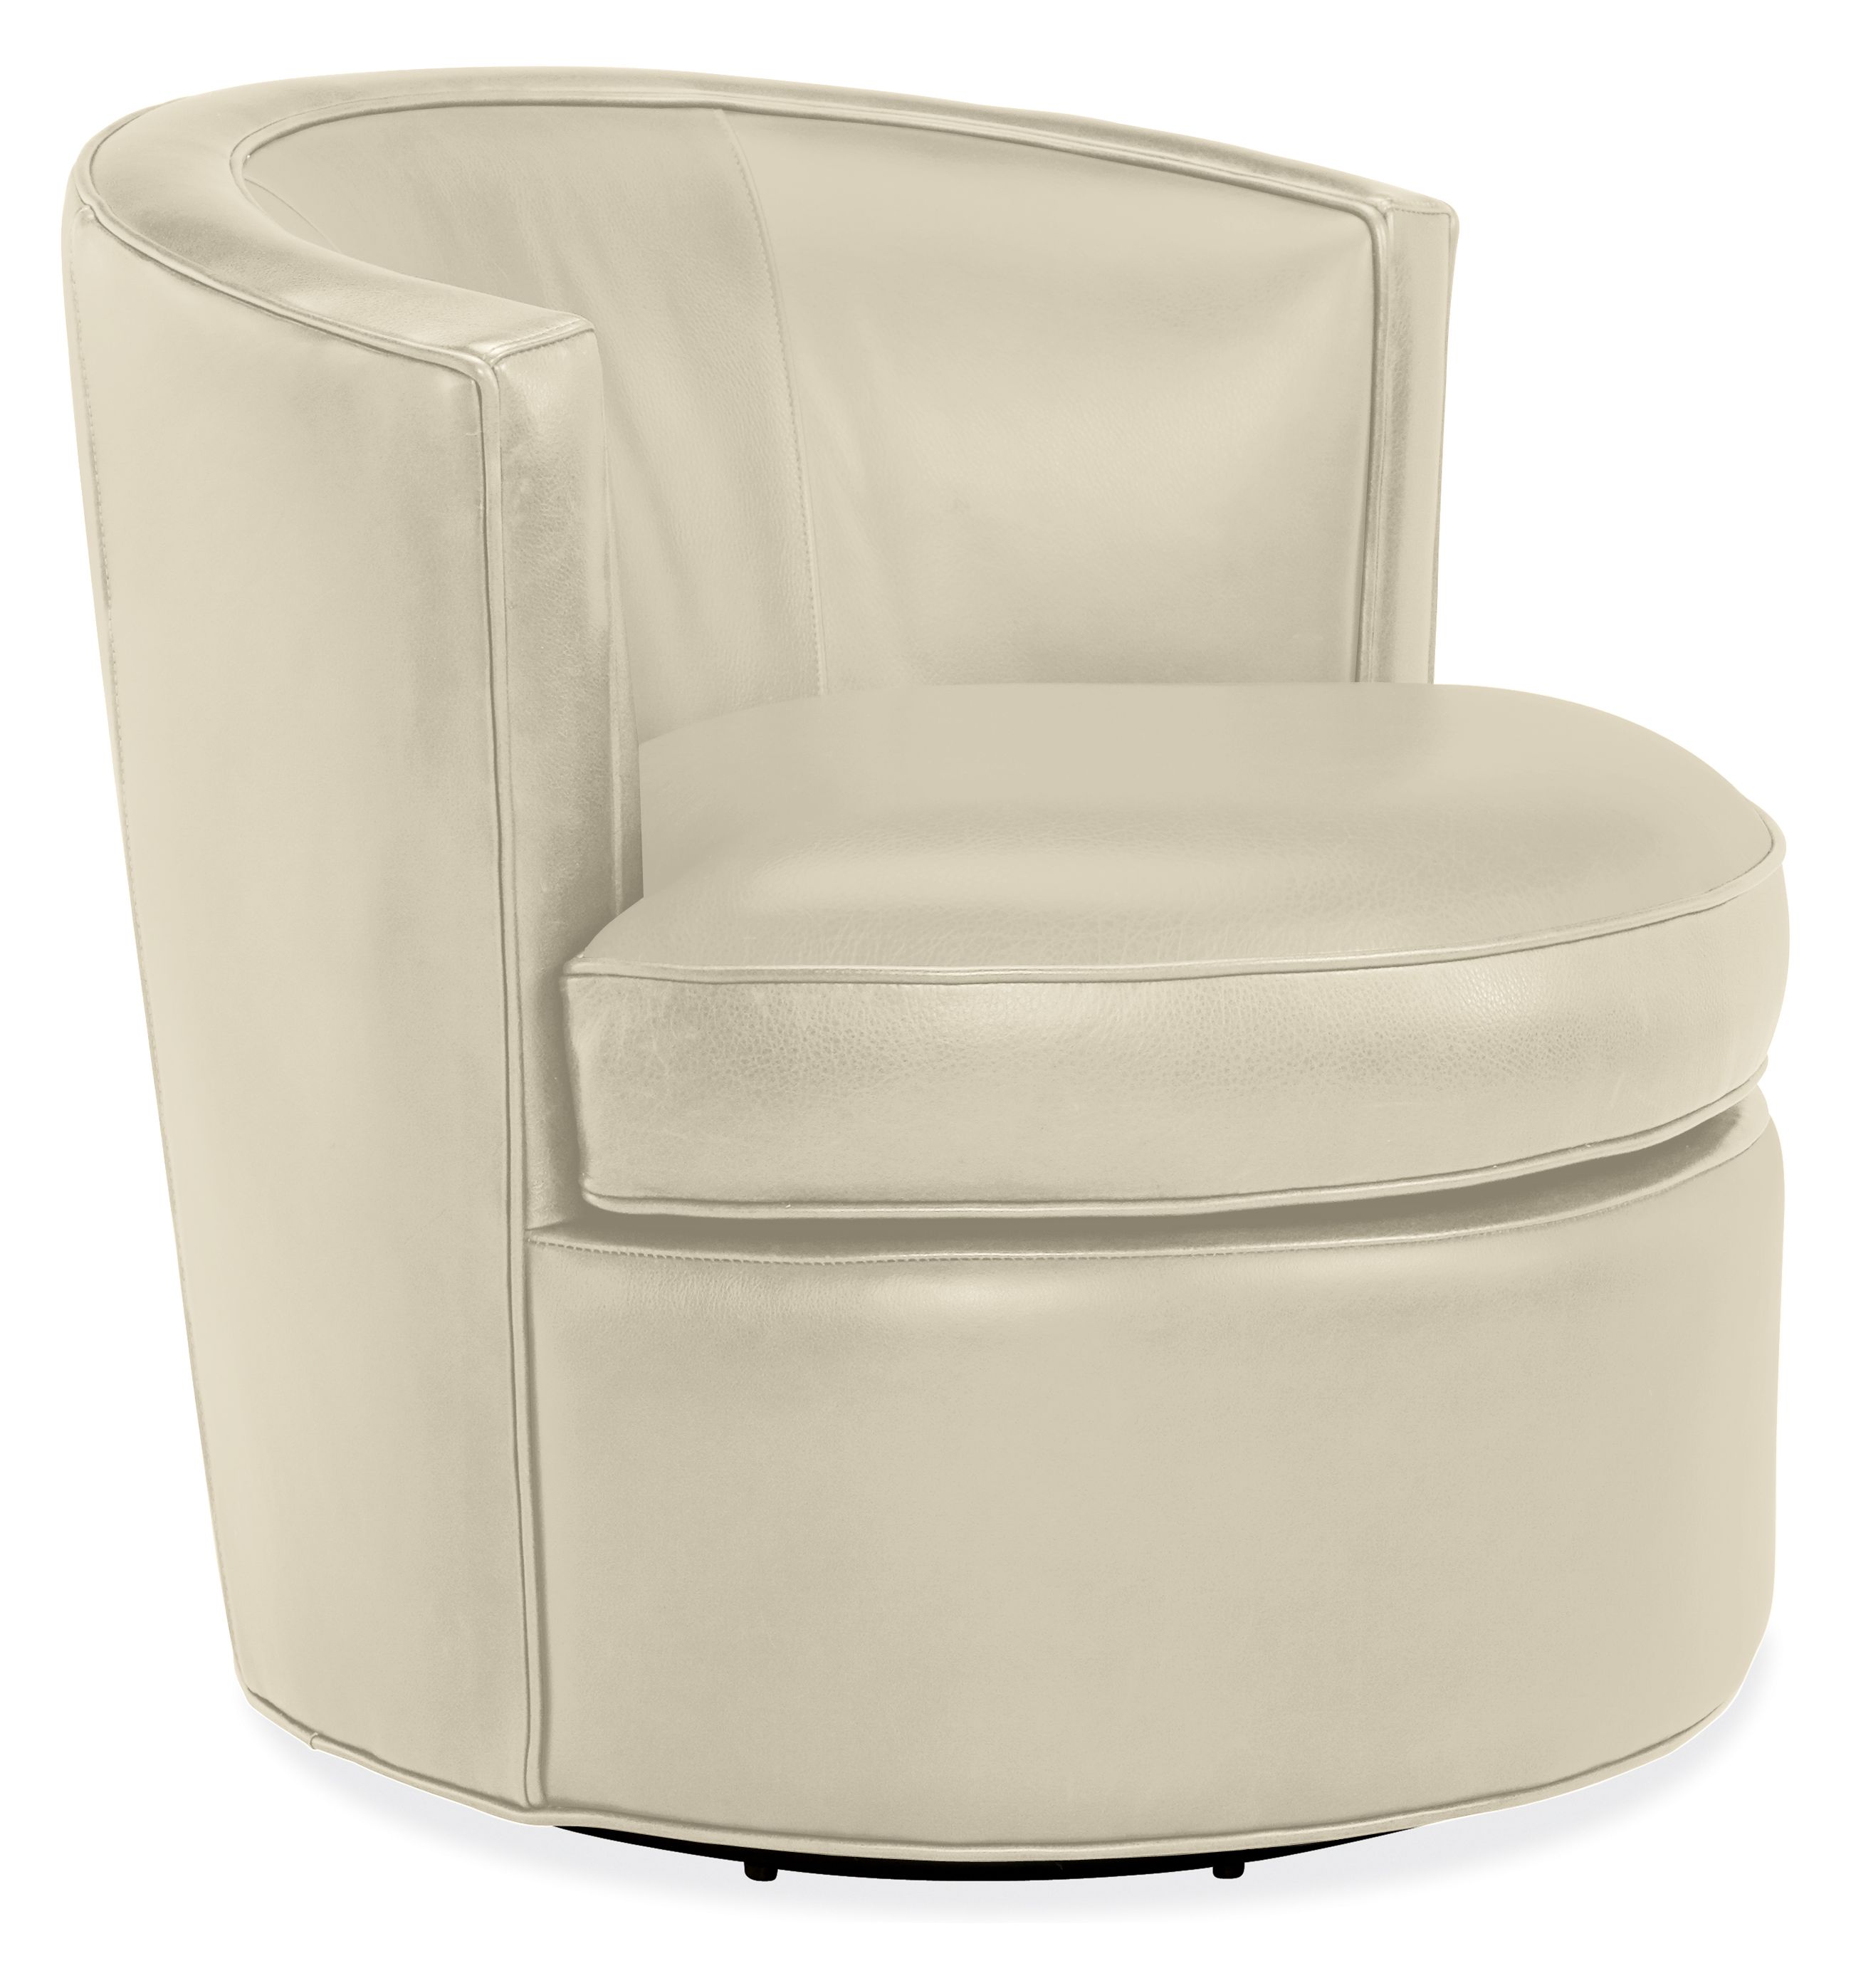 Otis Leather Swivel Chair Modern, Small Leather Swivel Chairs